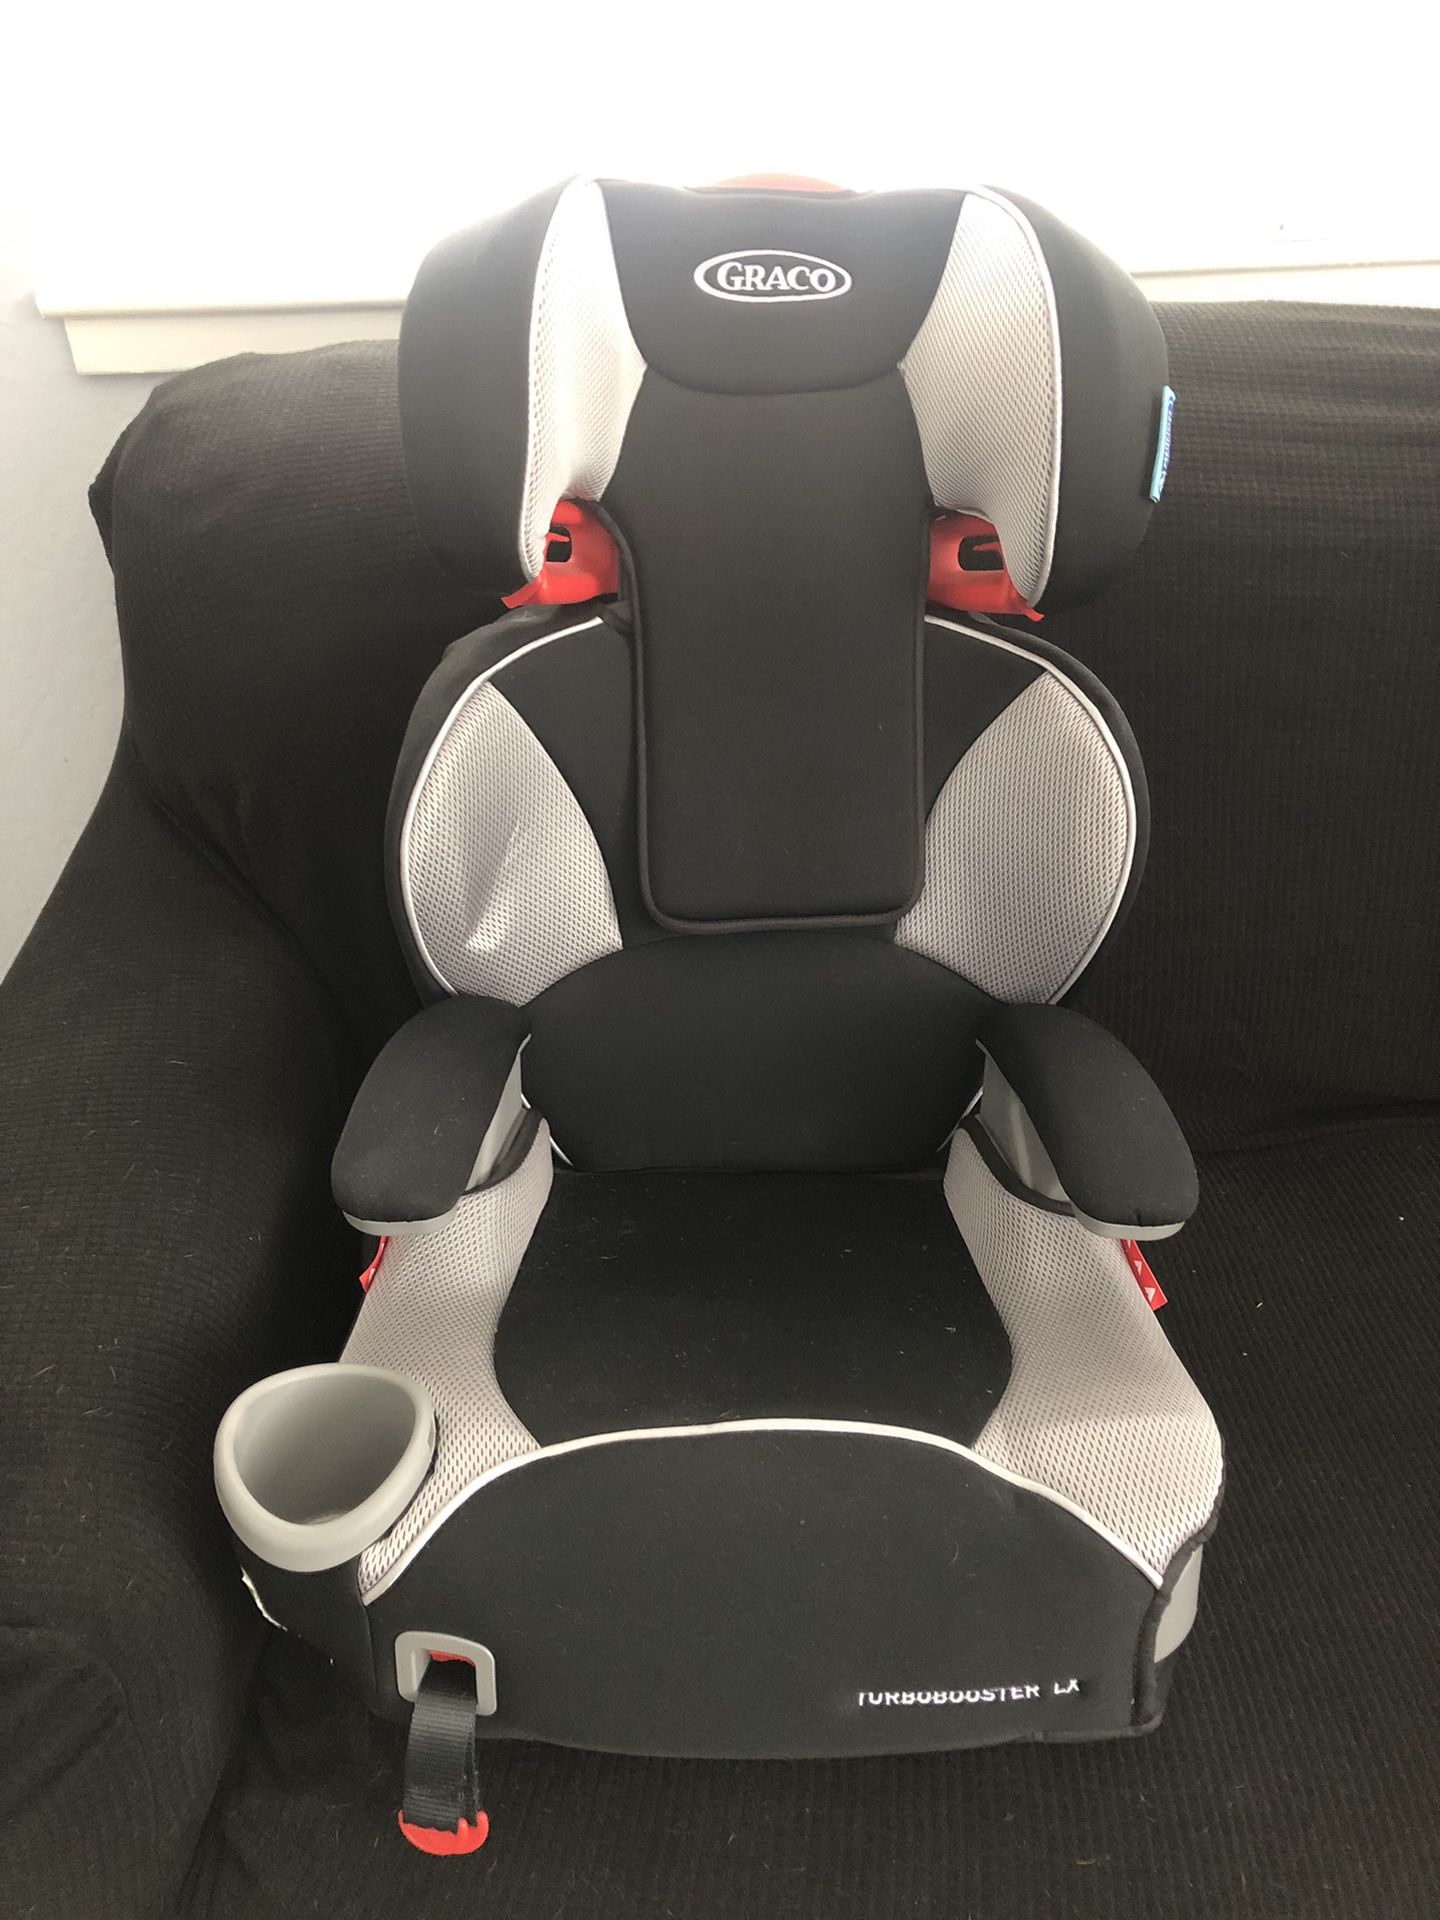 Booster Seat Graco Turbo booster LX